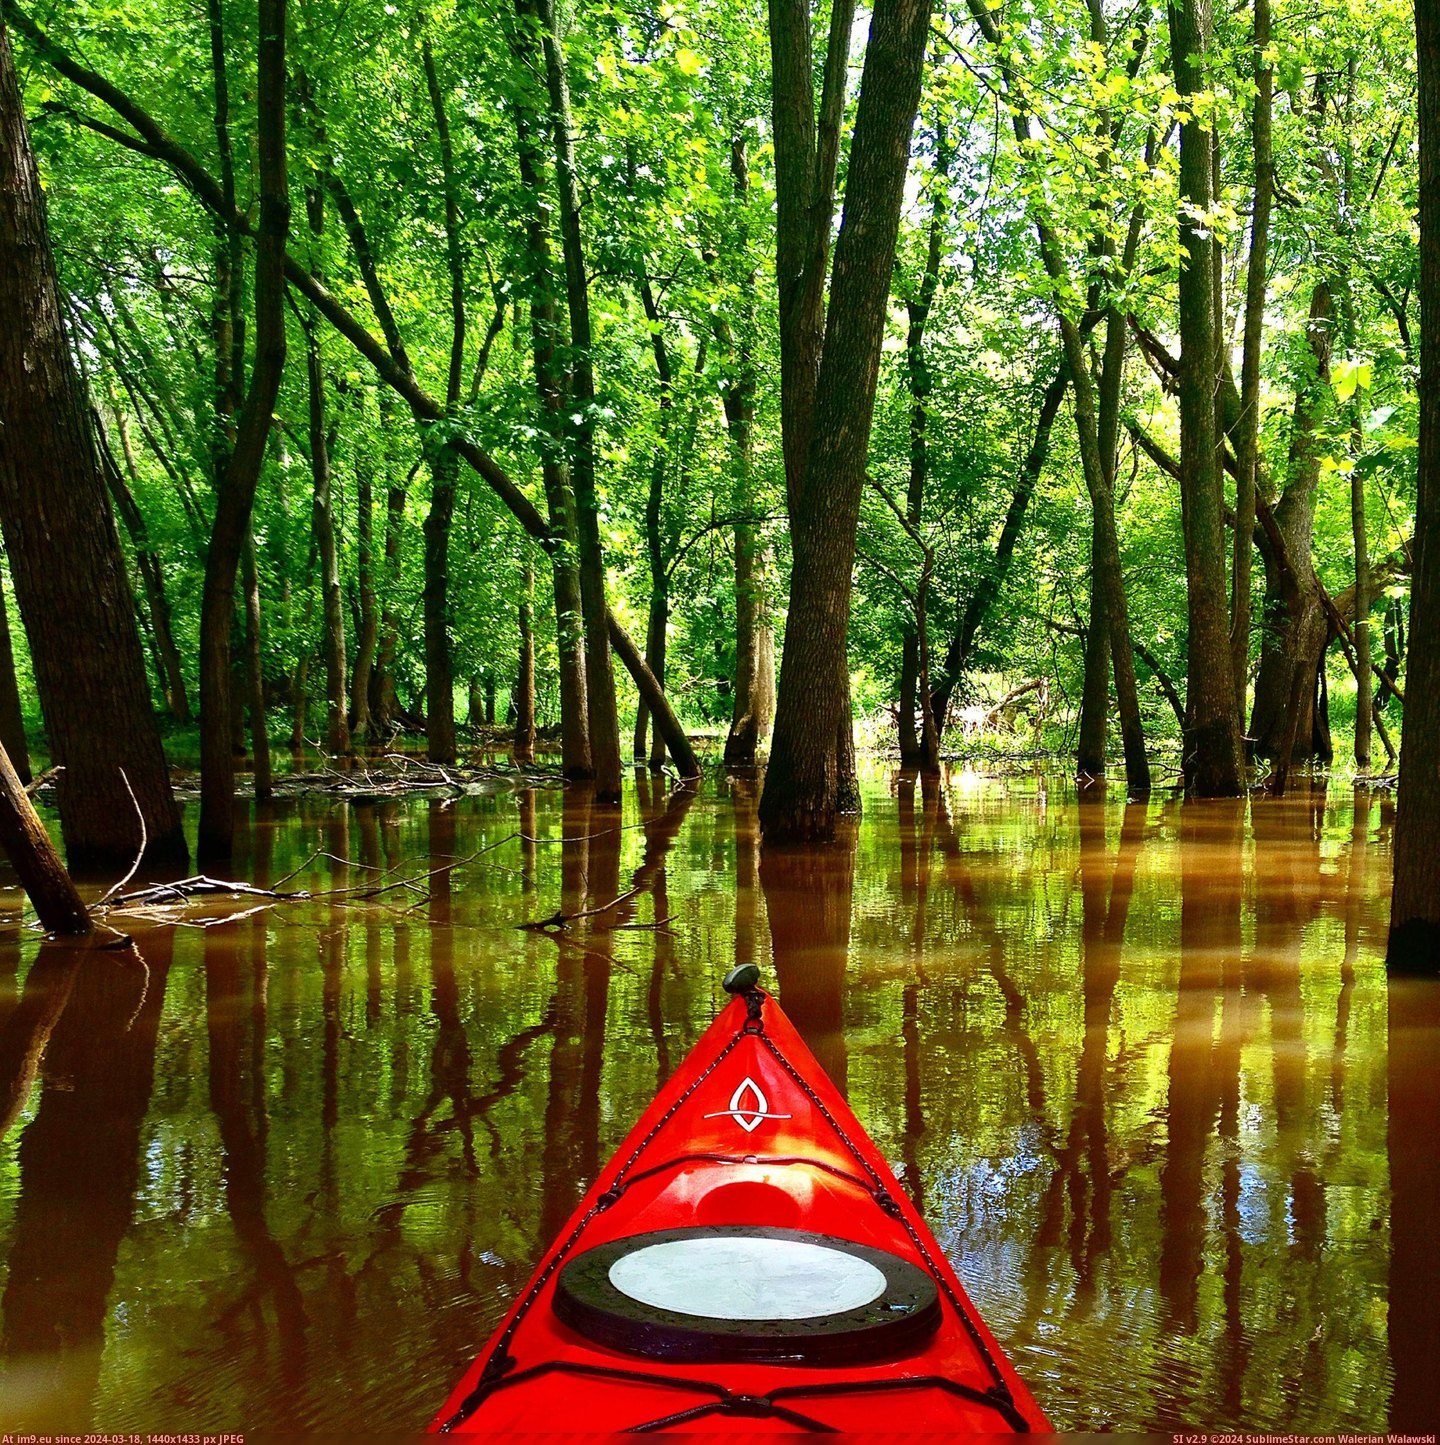 #Day #Spent #Kayaking #Flooding #Forest #Area [Pics] There has been some flooding in my area recently so I spent the day kayaking through the forest Pic. (Изображение из альбом My r/PICS favs))